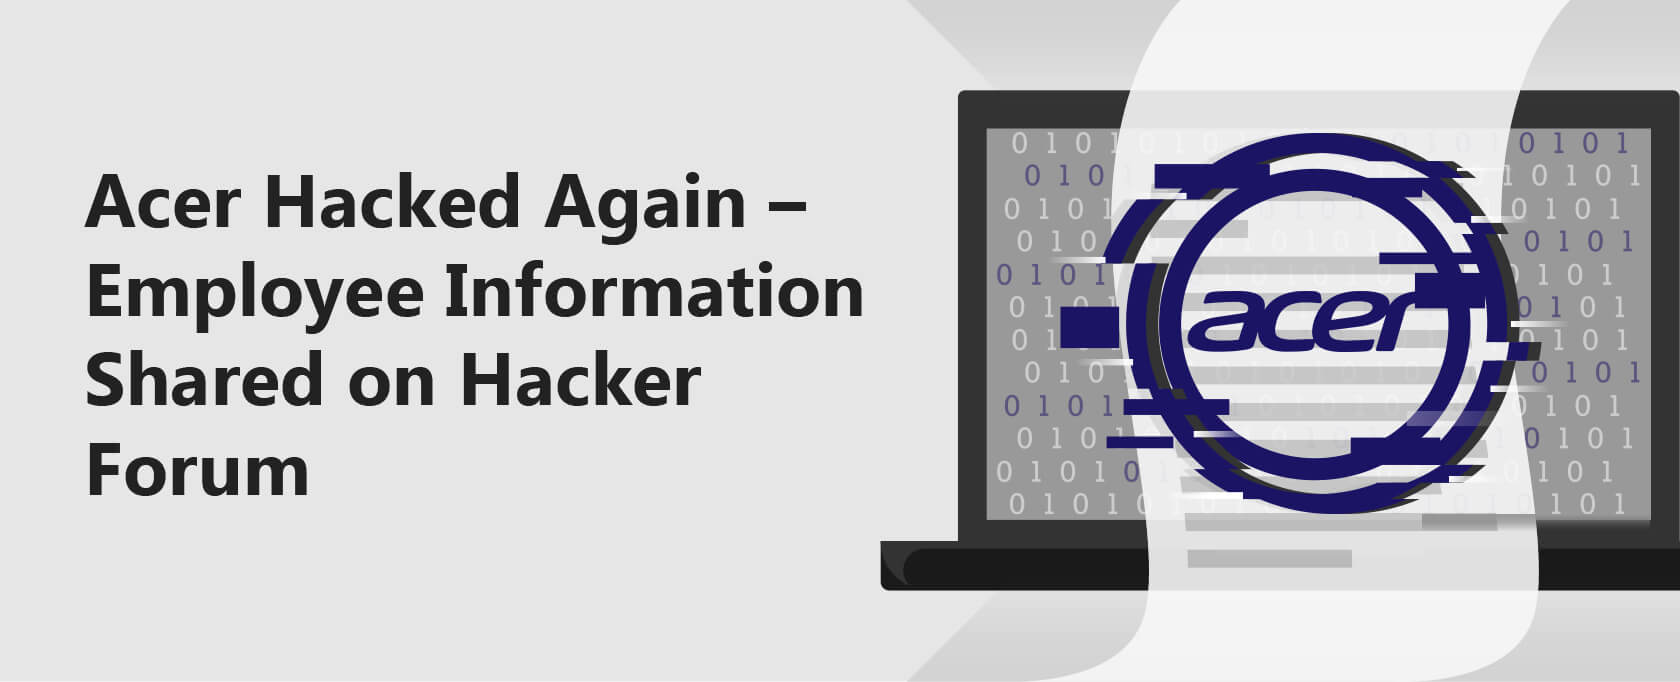 Acer Confirms Third Cyberattack in 2021 – Employee Information Shared on Hacker Forum